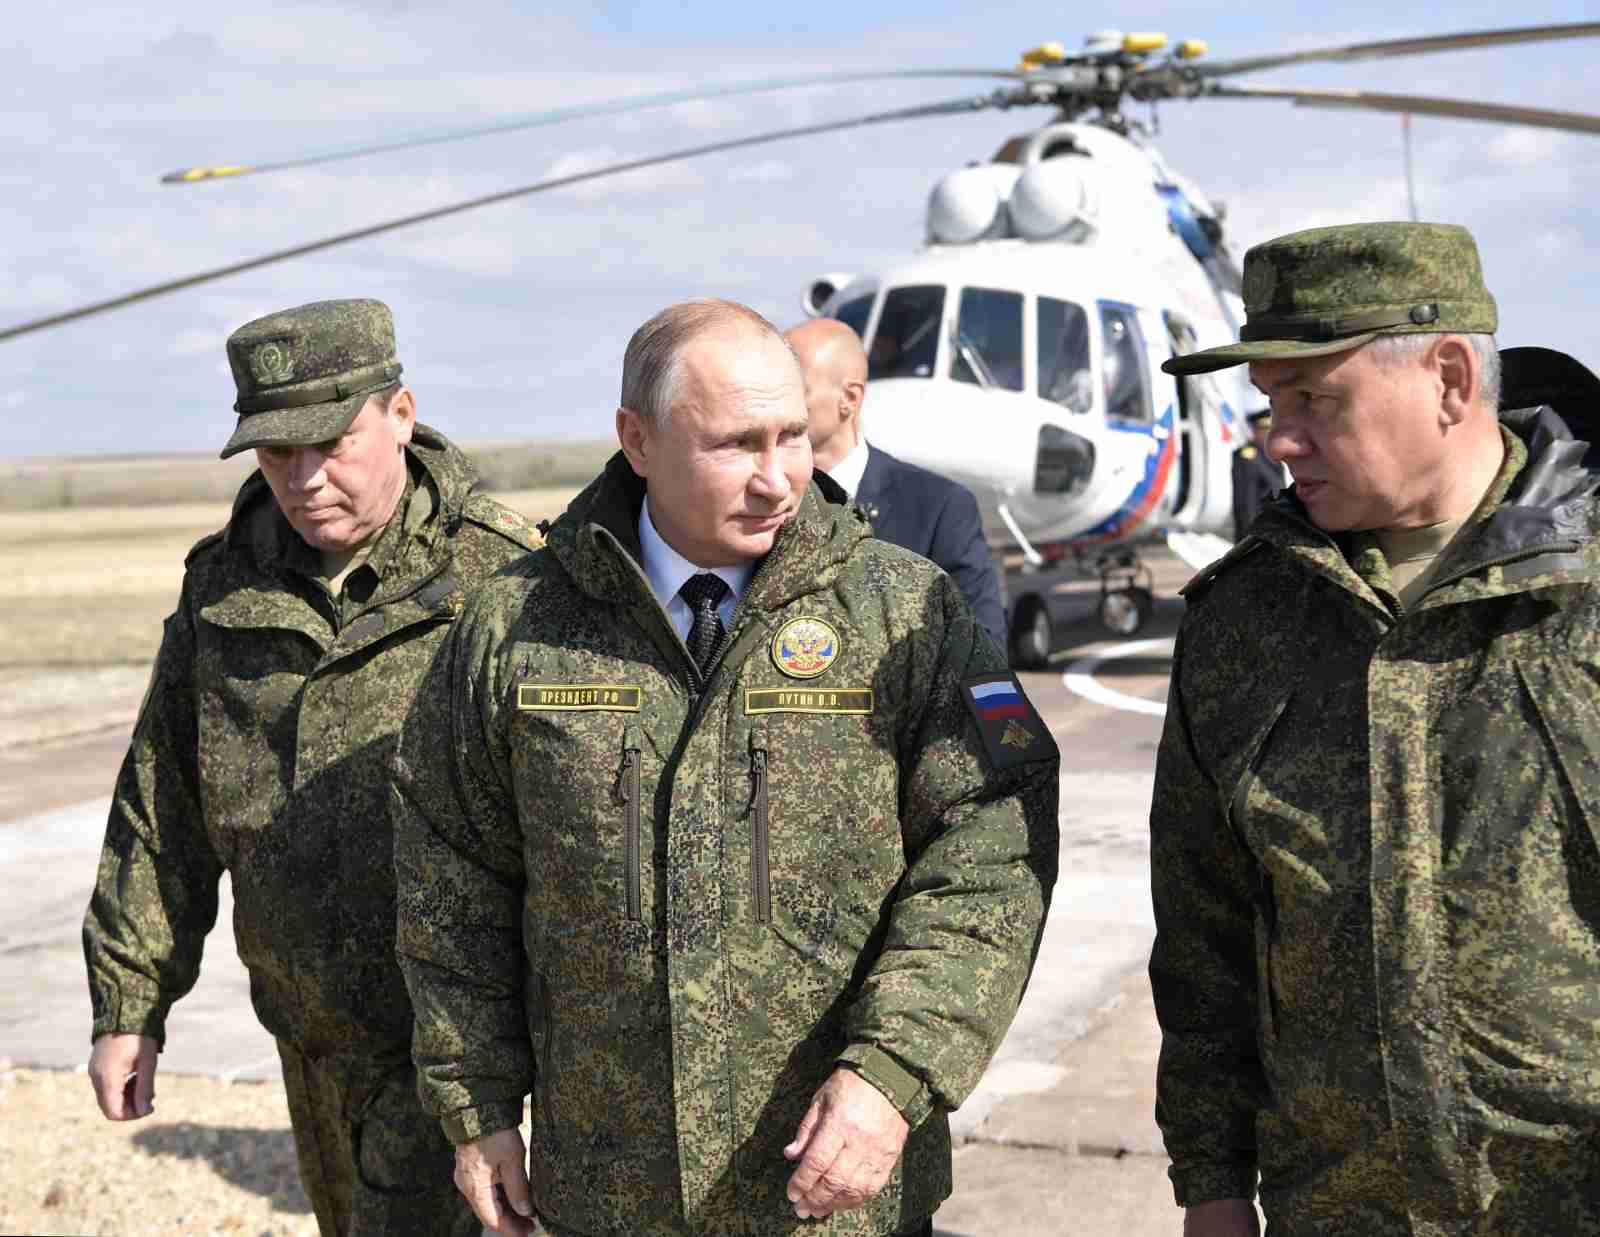 Russia's President Vladimir Putin, Defence Minister Sergei Shoigu and Chief of the General Staff of Russian Armed Forces Valery Gerasimov visit the firing range Donguz to oversee the military exercises known as "Centre-2019" in Orenburg Region, Russia September 20, 2019.